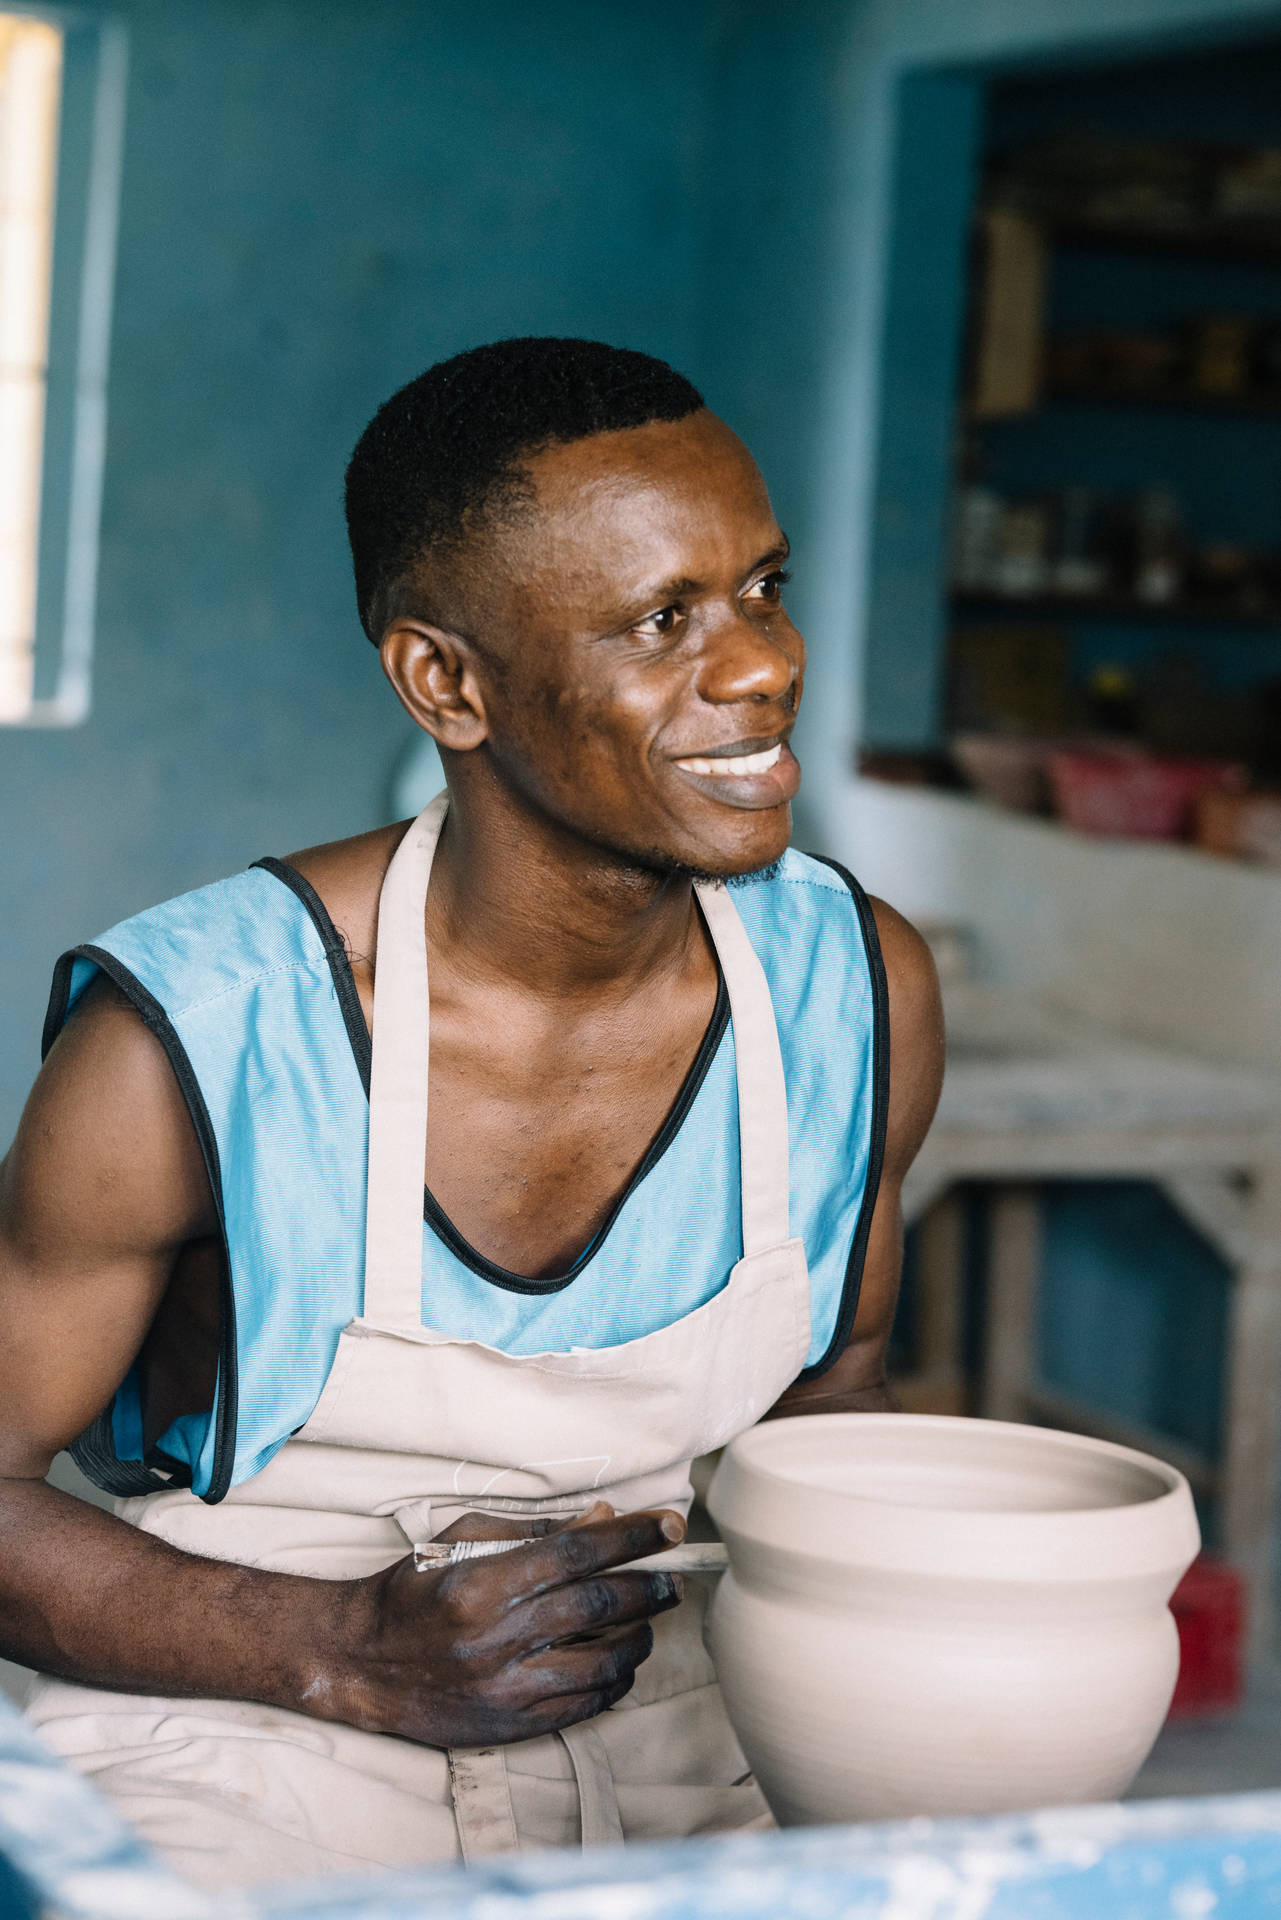 A Local Artisan Shaping Pottery In Sierra Leone